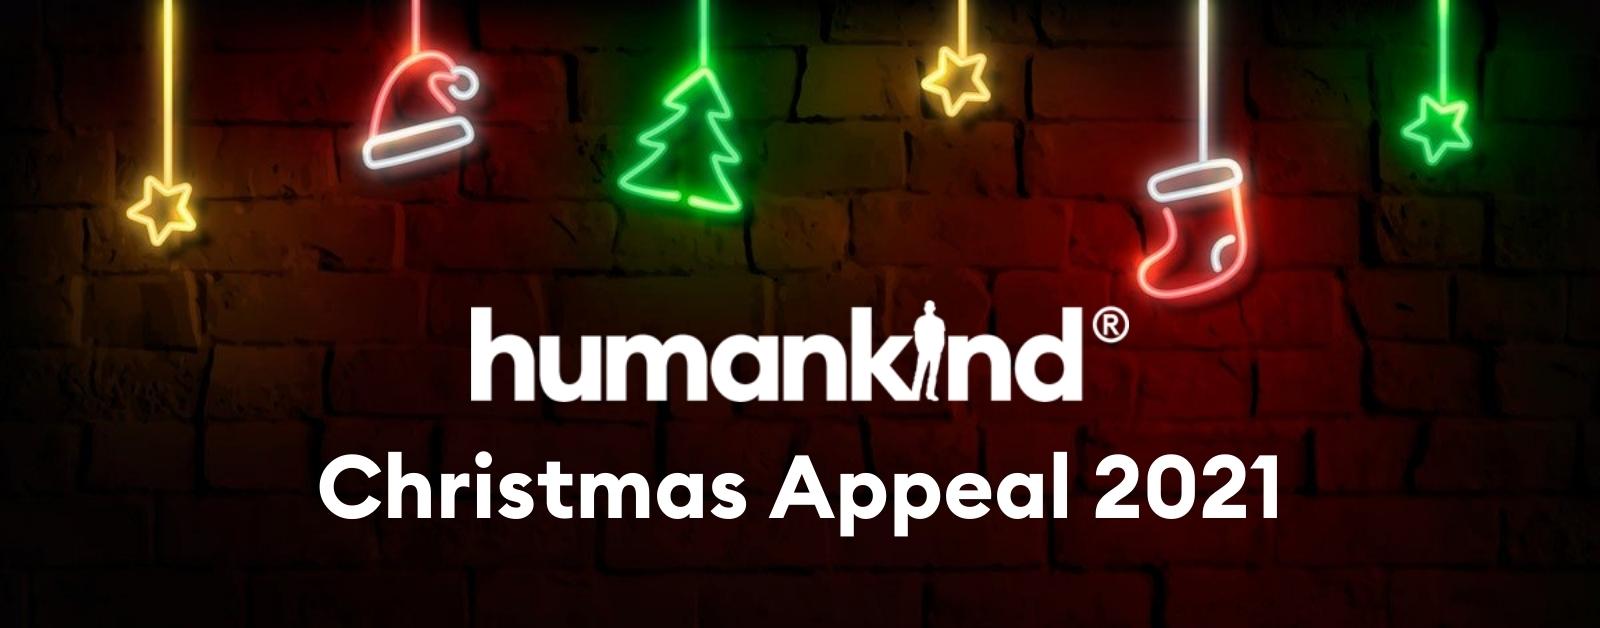 https://humankindcharity.org.uk/wp-content/uploads/2021/11/Christmas-Appeal-2021-featured-image.jpg